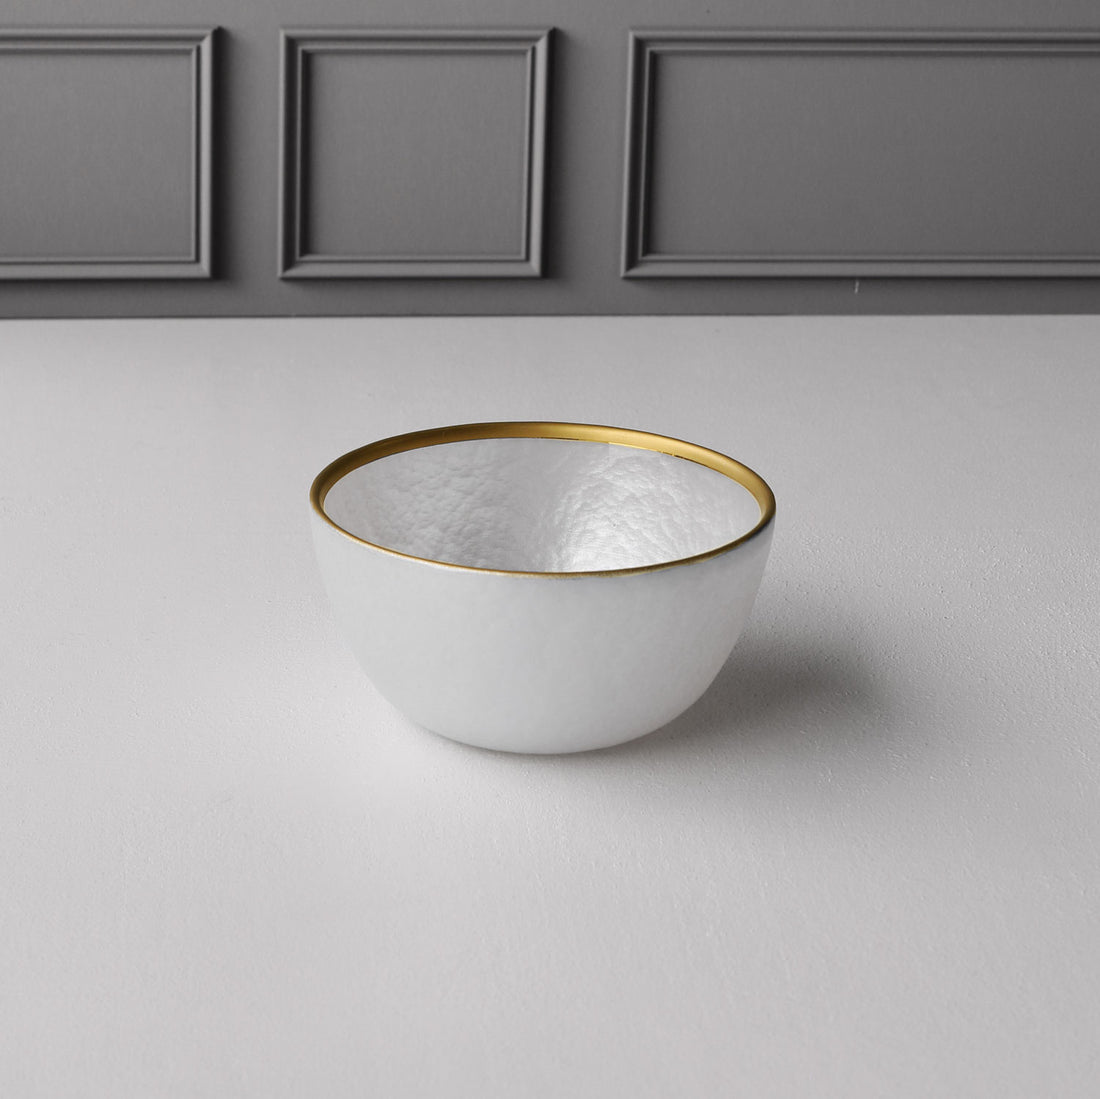 GLASS White Opalescent Small Bowl with Gold Rim (White and Gold)